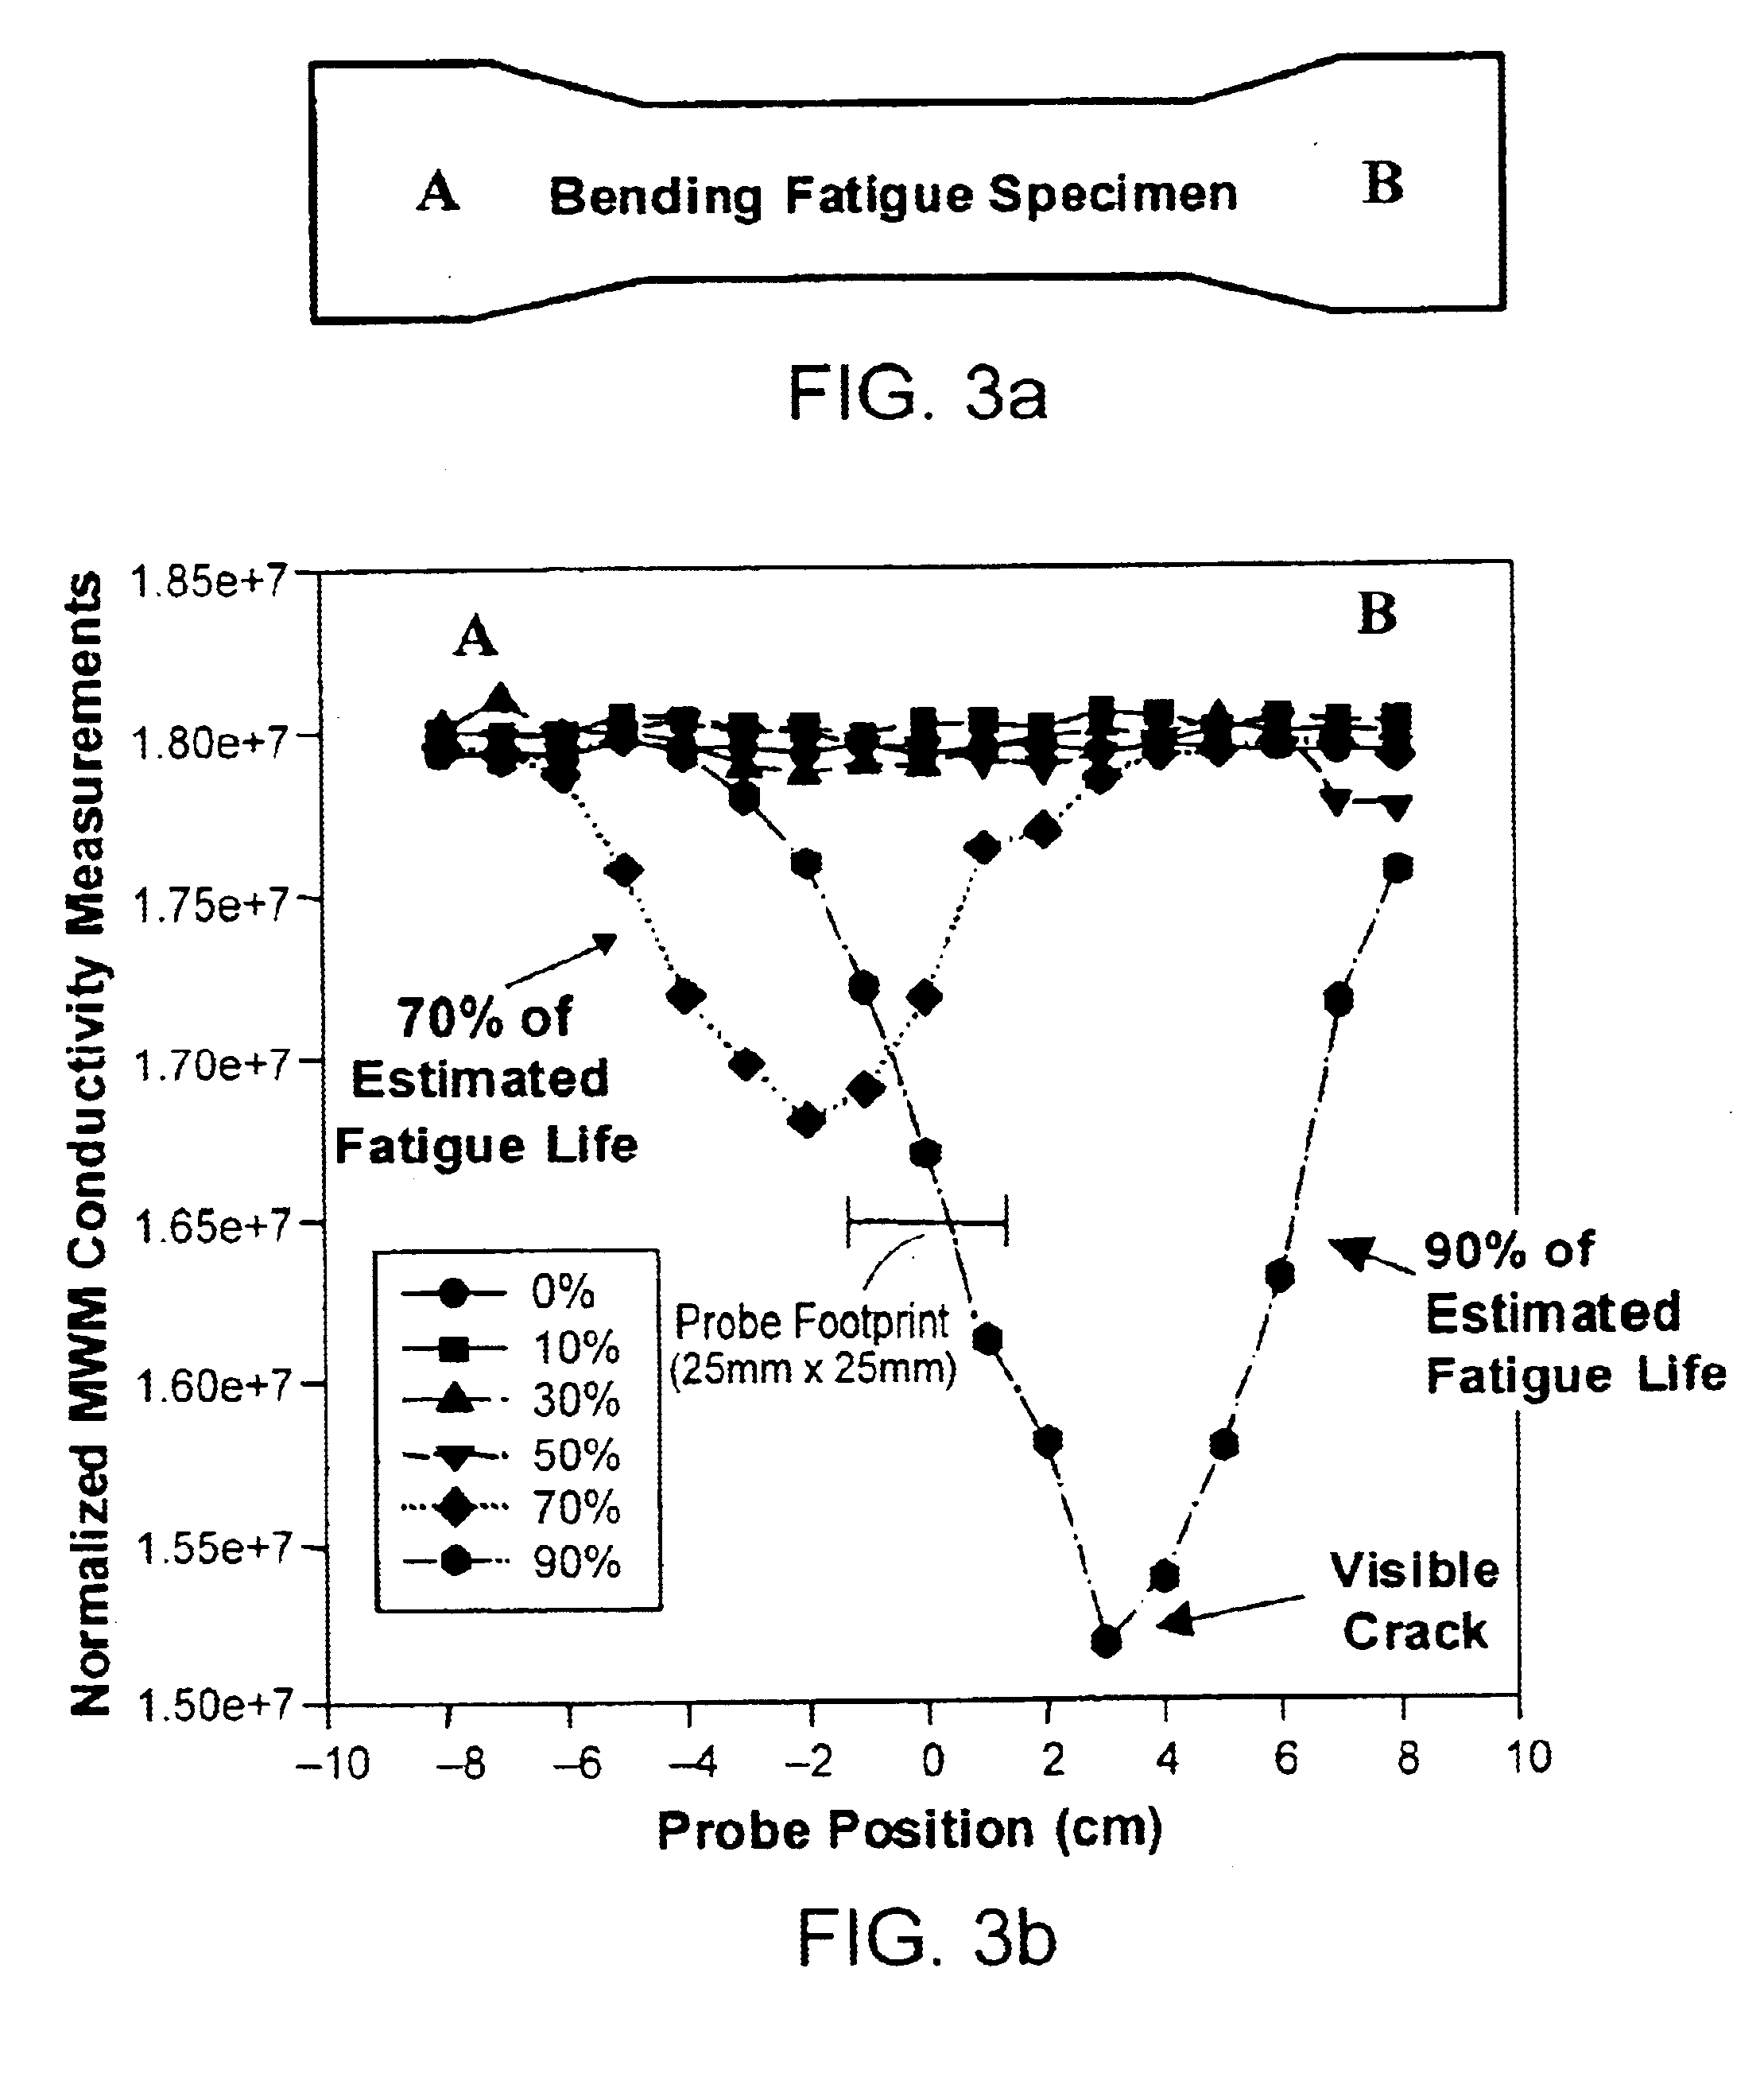 Surface mounted and scanning spatially periodic eddy-current sensor arrays